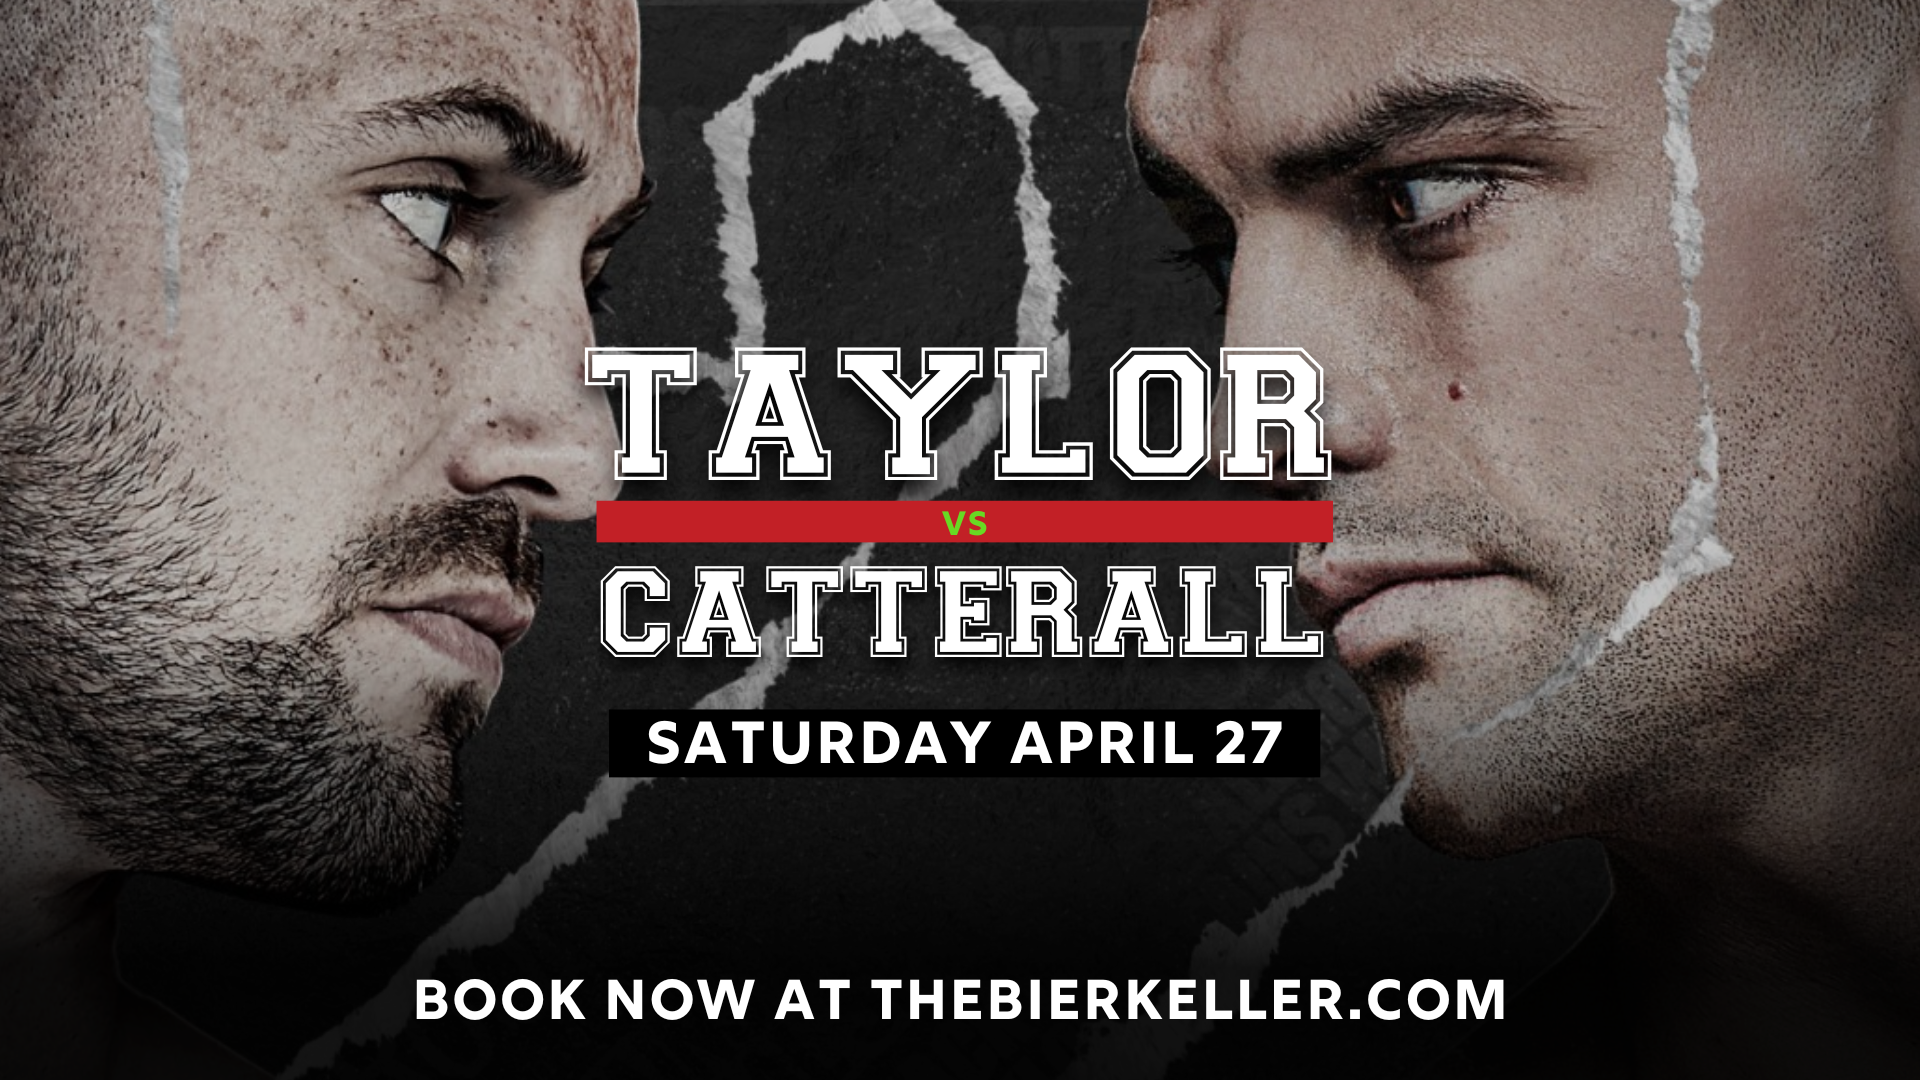 Taylor v Catterall